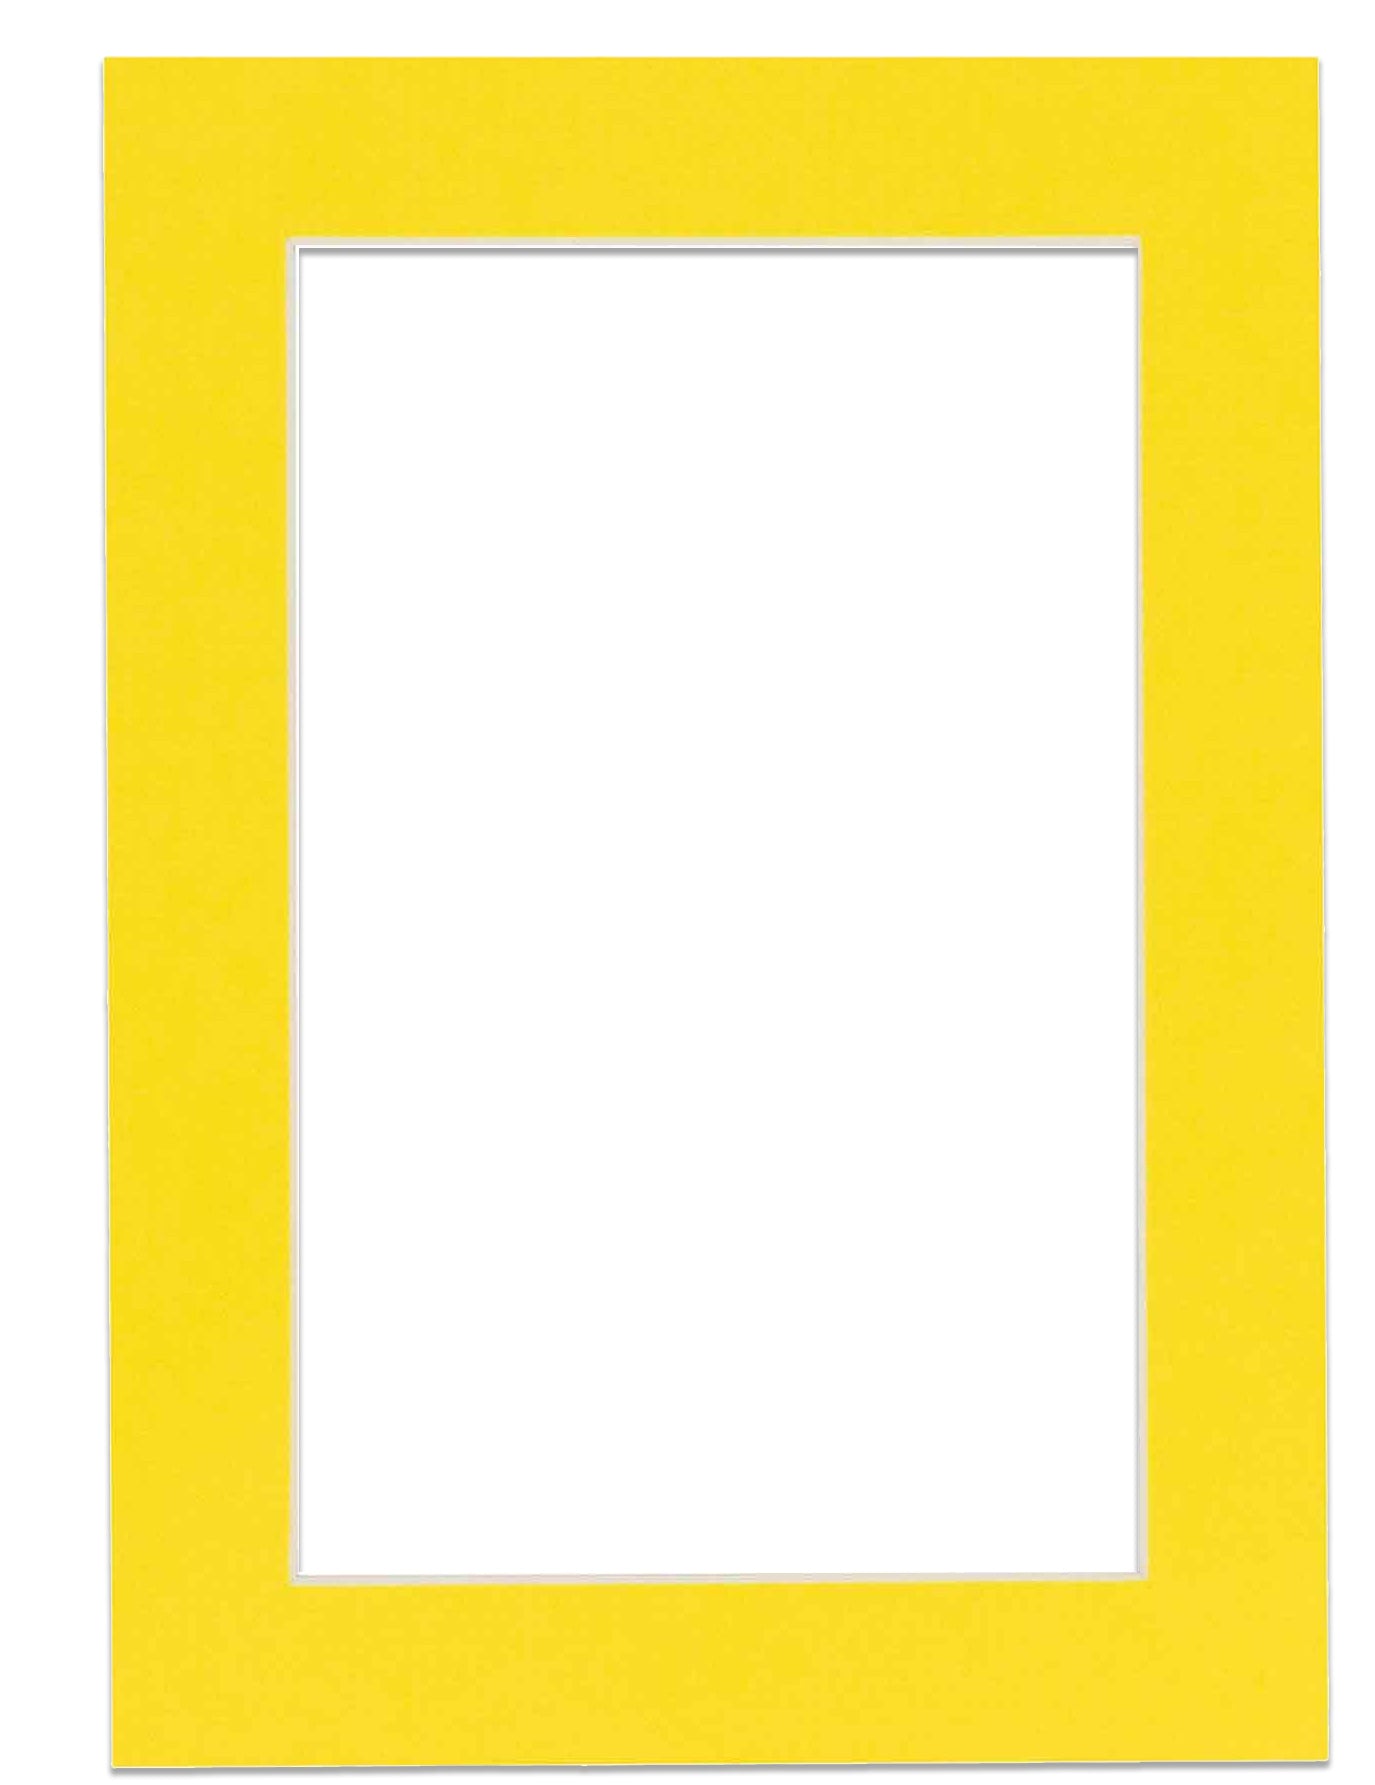 11x17 Mat for 16x20 Frame - Precut Mat Board Acid-Free White 11x17 Photo  Matte Made to Fit a 16x20 Picture Frame Premium Matboard for Family Photos  Show Kits Art Picture Framing Pack